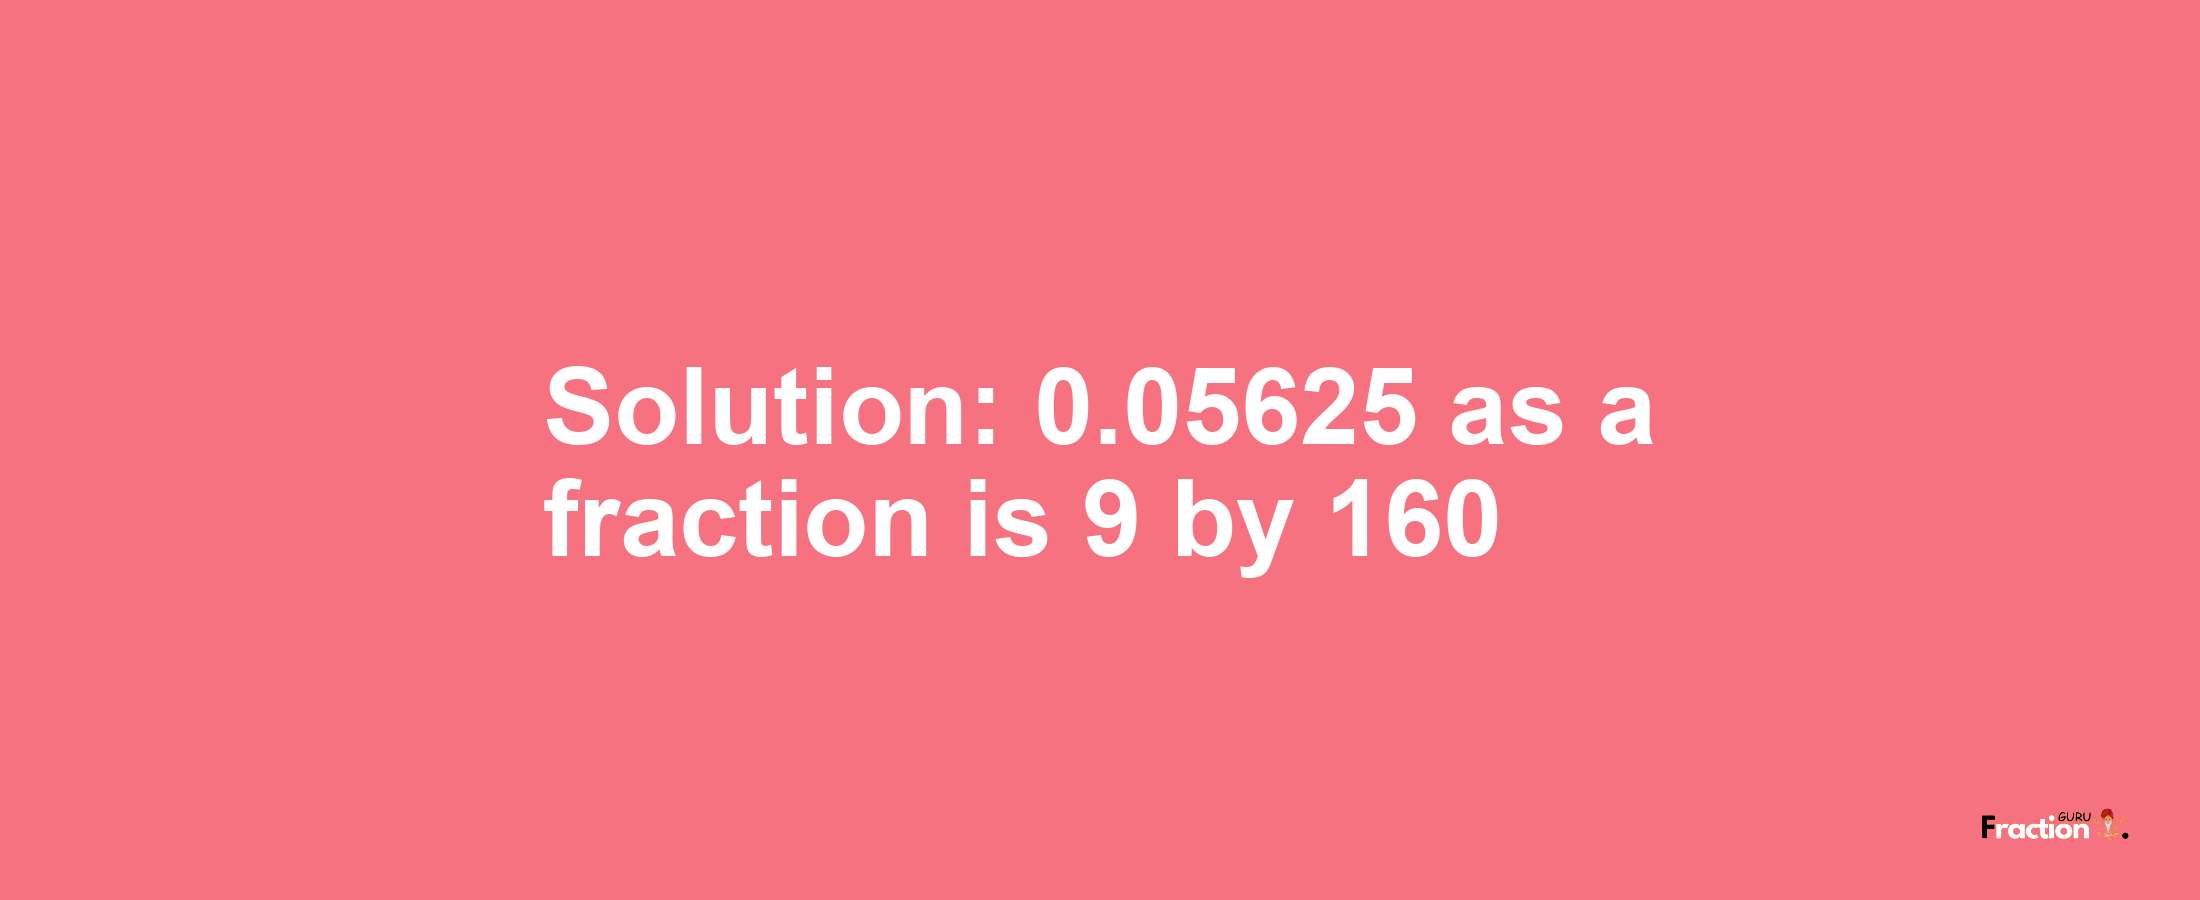 Solution:0.05625 as a fraction is 9/160